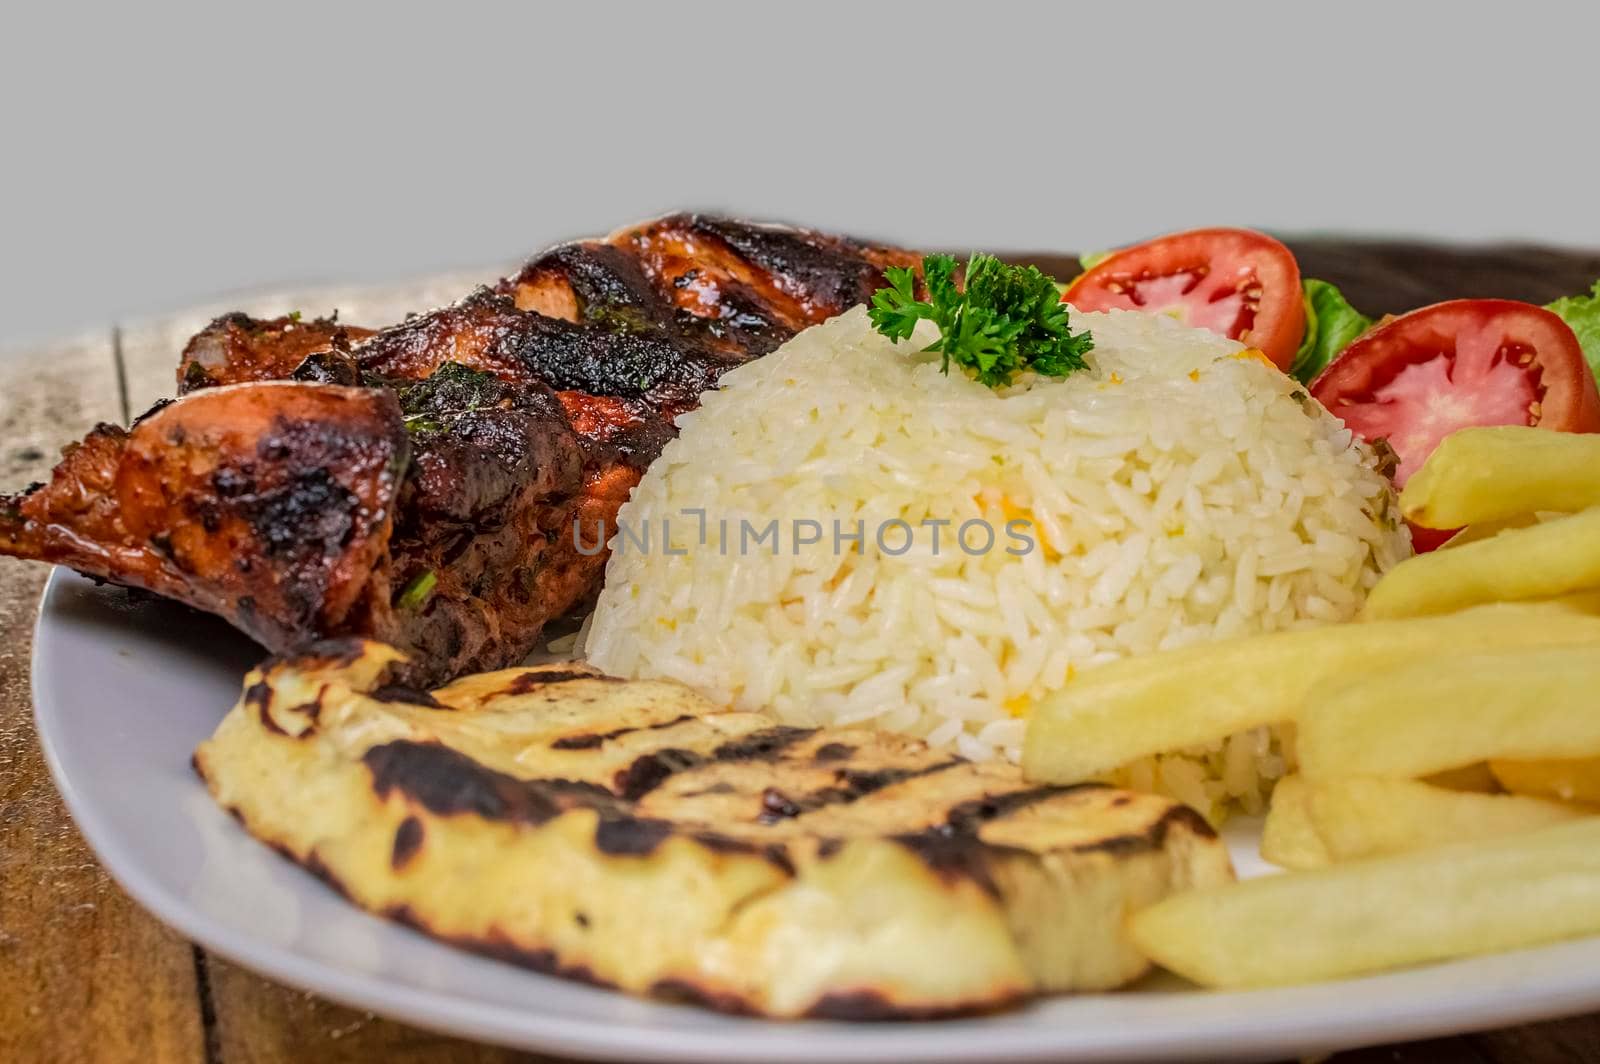 Pork rib with rice, fried cheese and tomato salad, Nicaraguan food served on wooden background, Plate of pork rib and rice served on wooden background